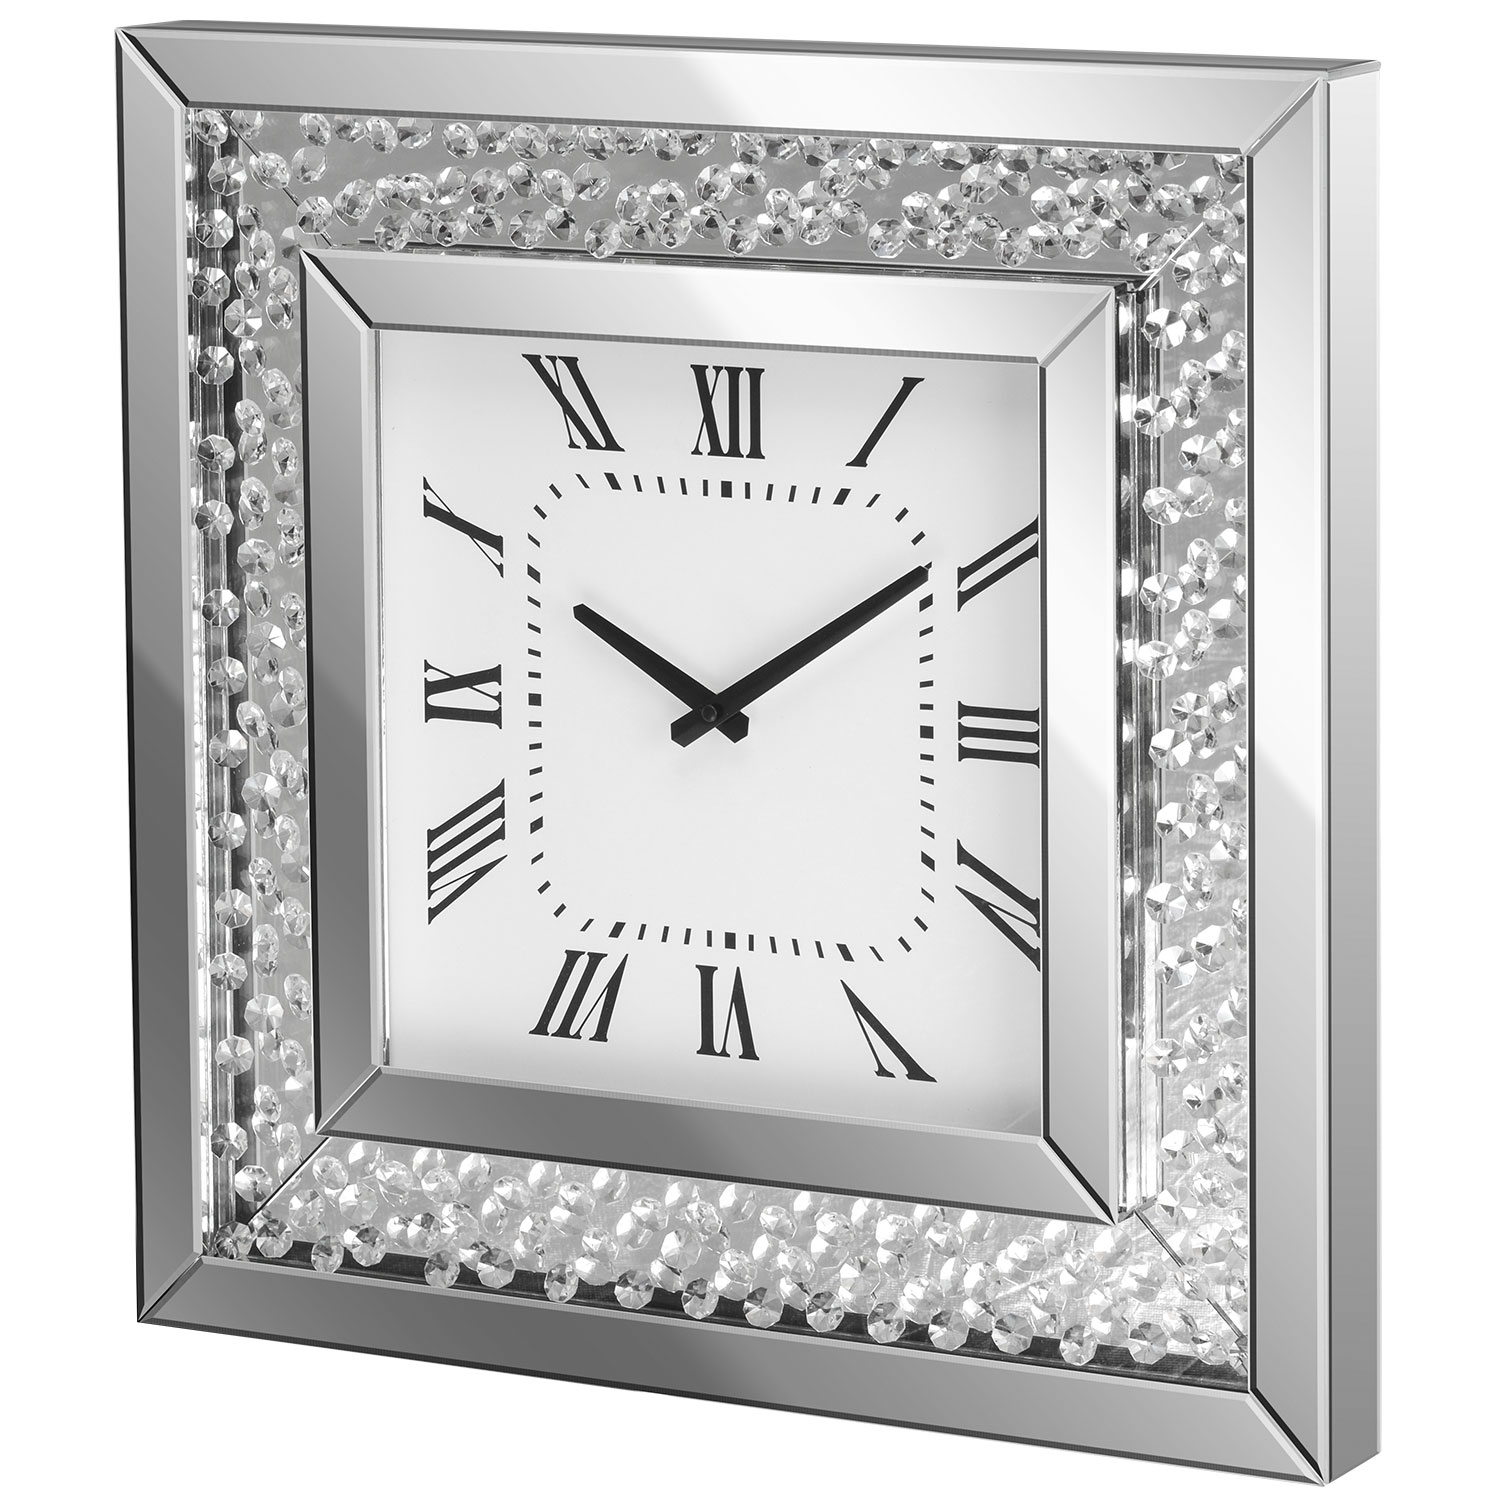 Christow Floating Crystal Mirrored Wall Clock